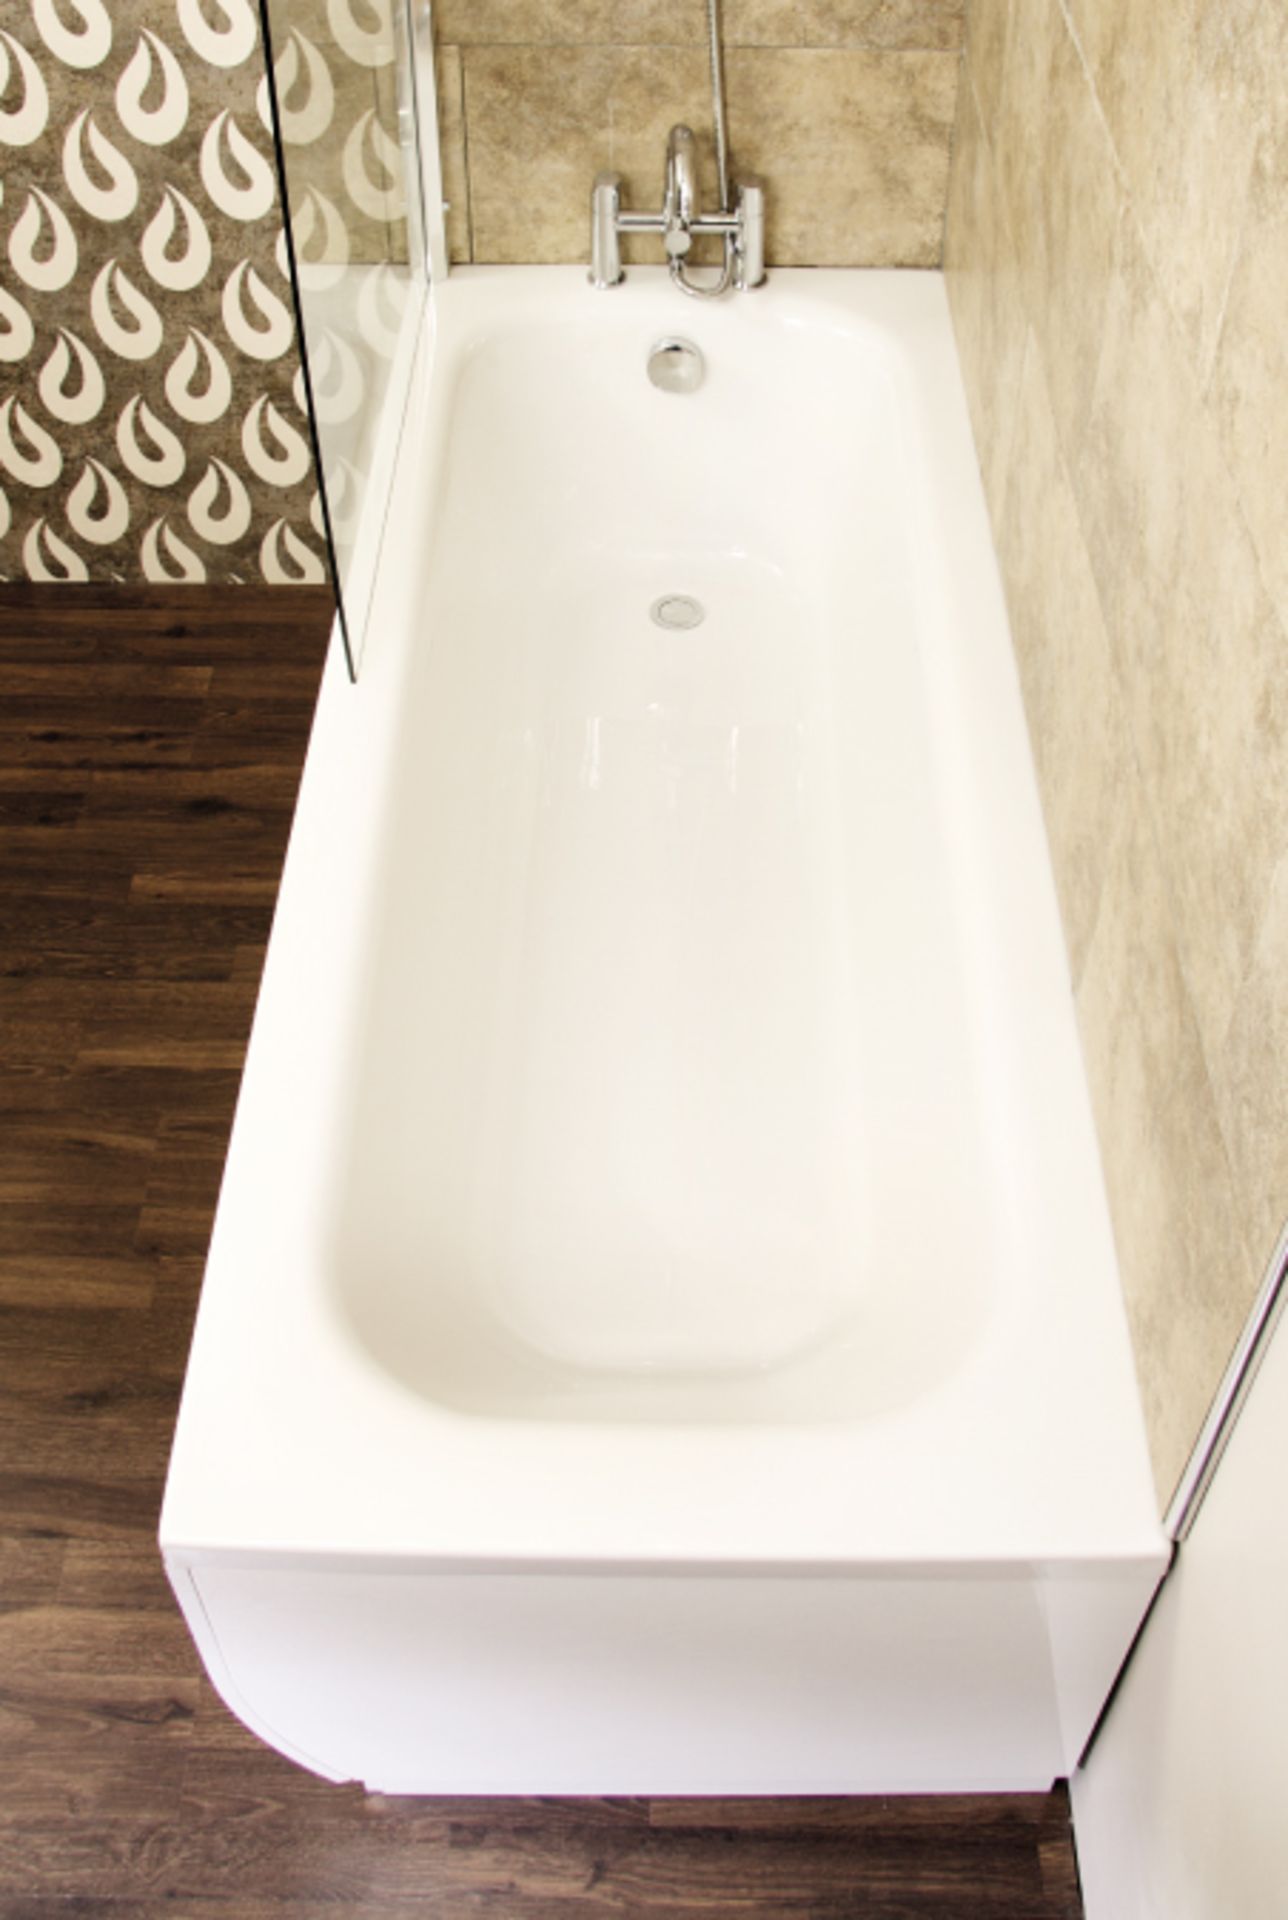 Dovcor Moreno bath and matching Moreno Right hand hinged glass screen (D.003.004RH). Both new in